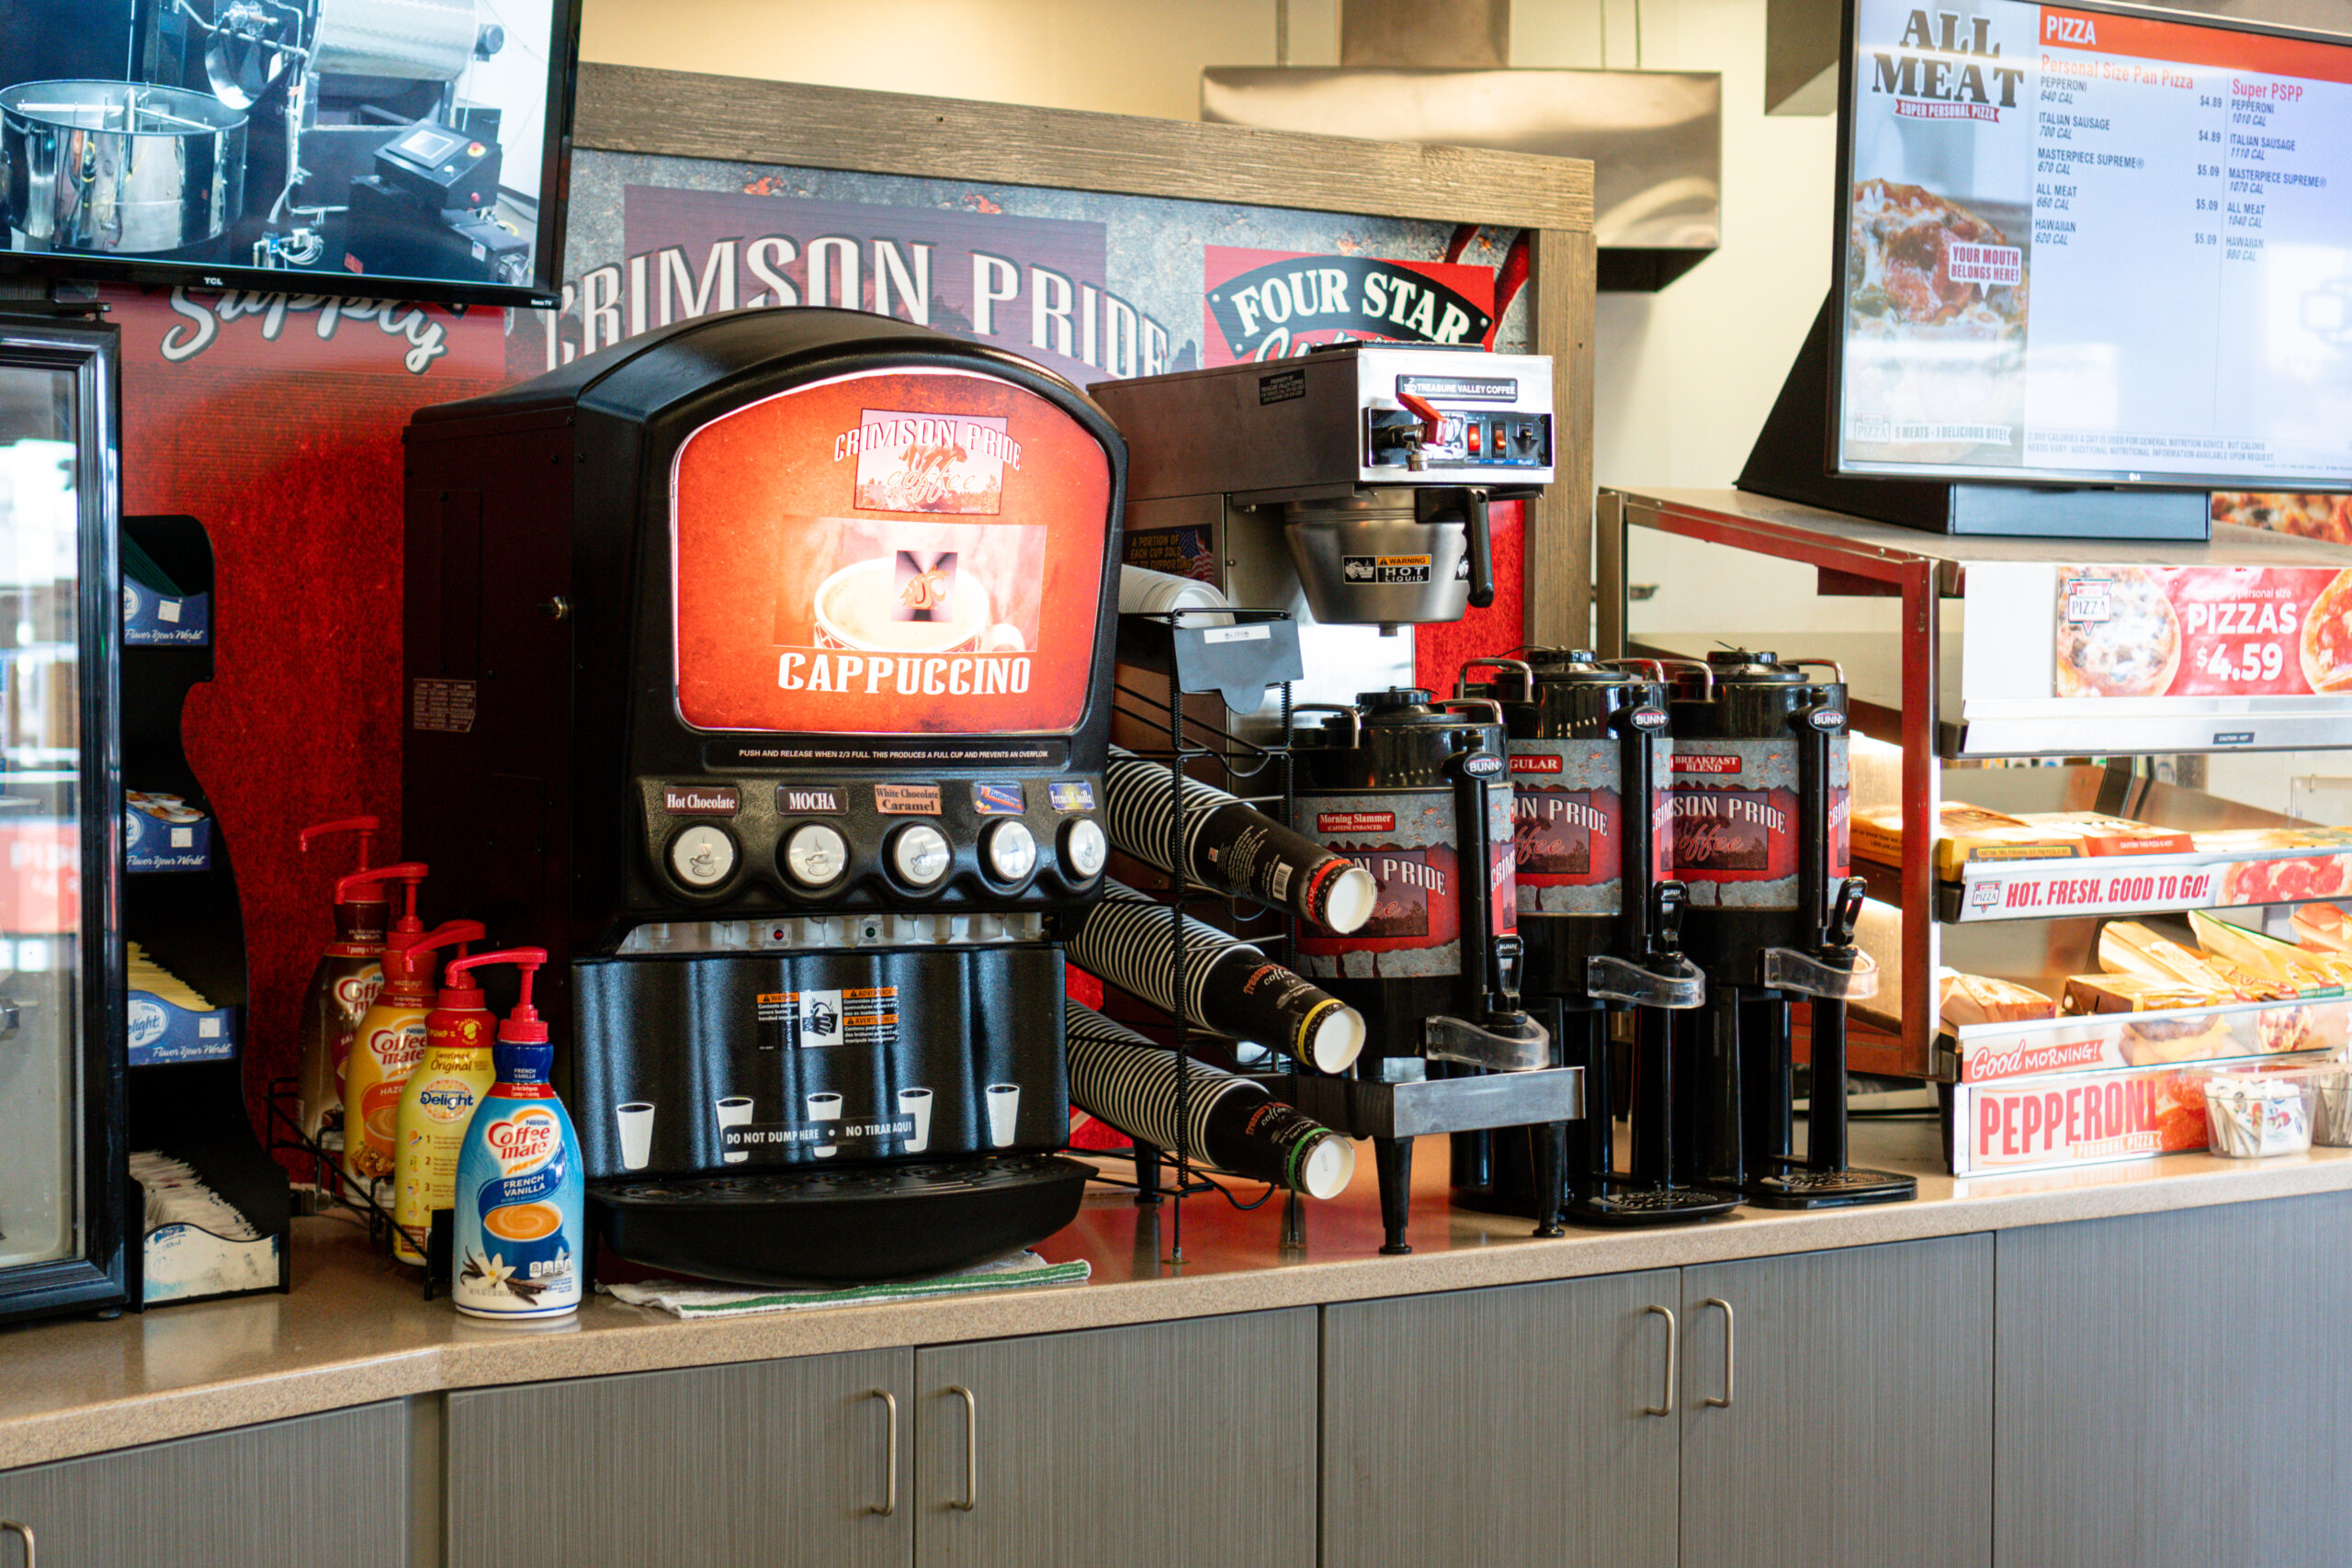 A coffee station next to a pizza station at a Four Star Supply owned convenience store